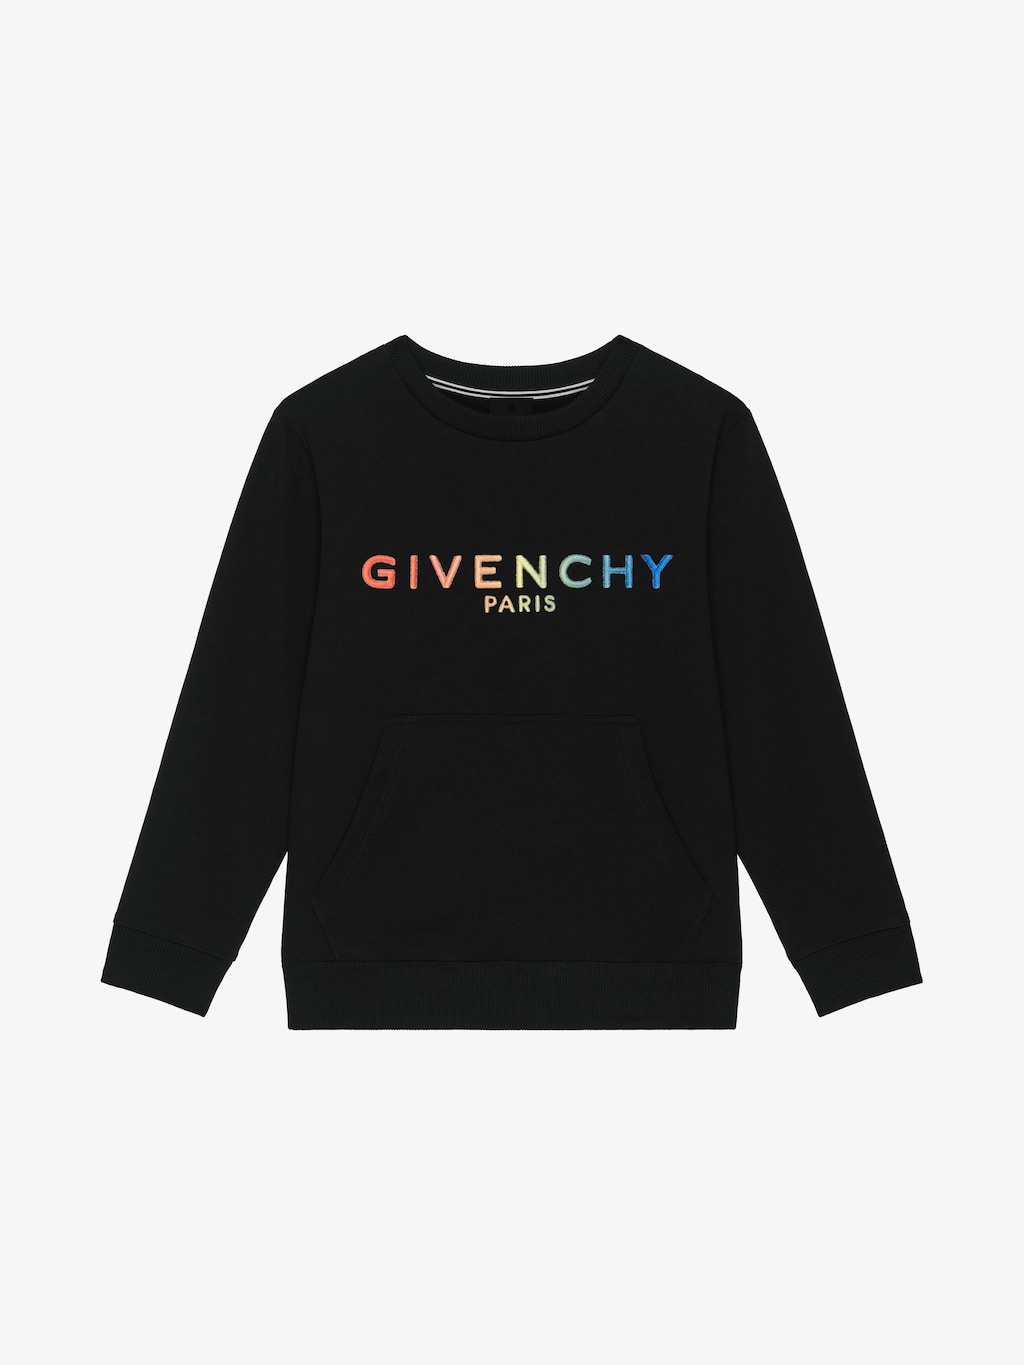 givenchy.com | Sweatshirt in embroidered fleece